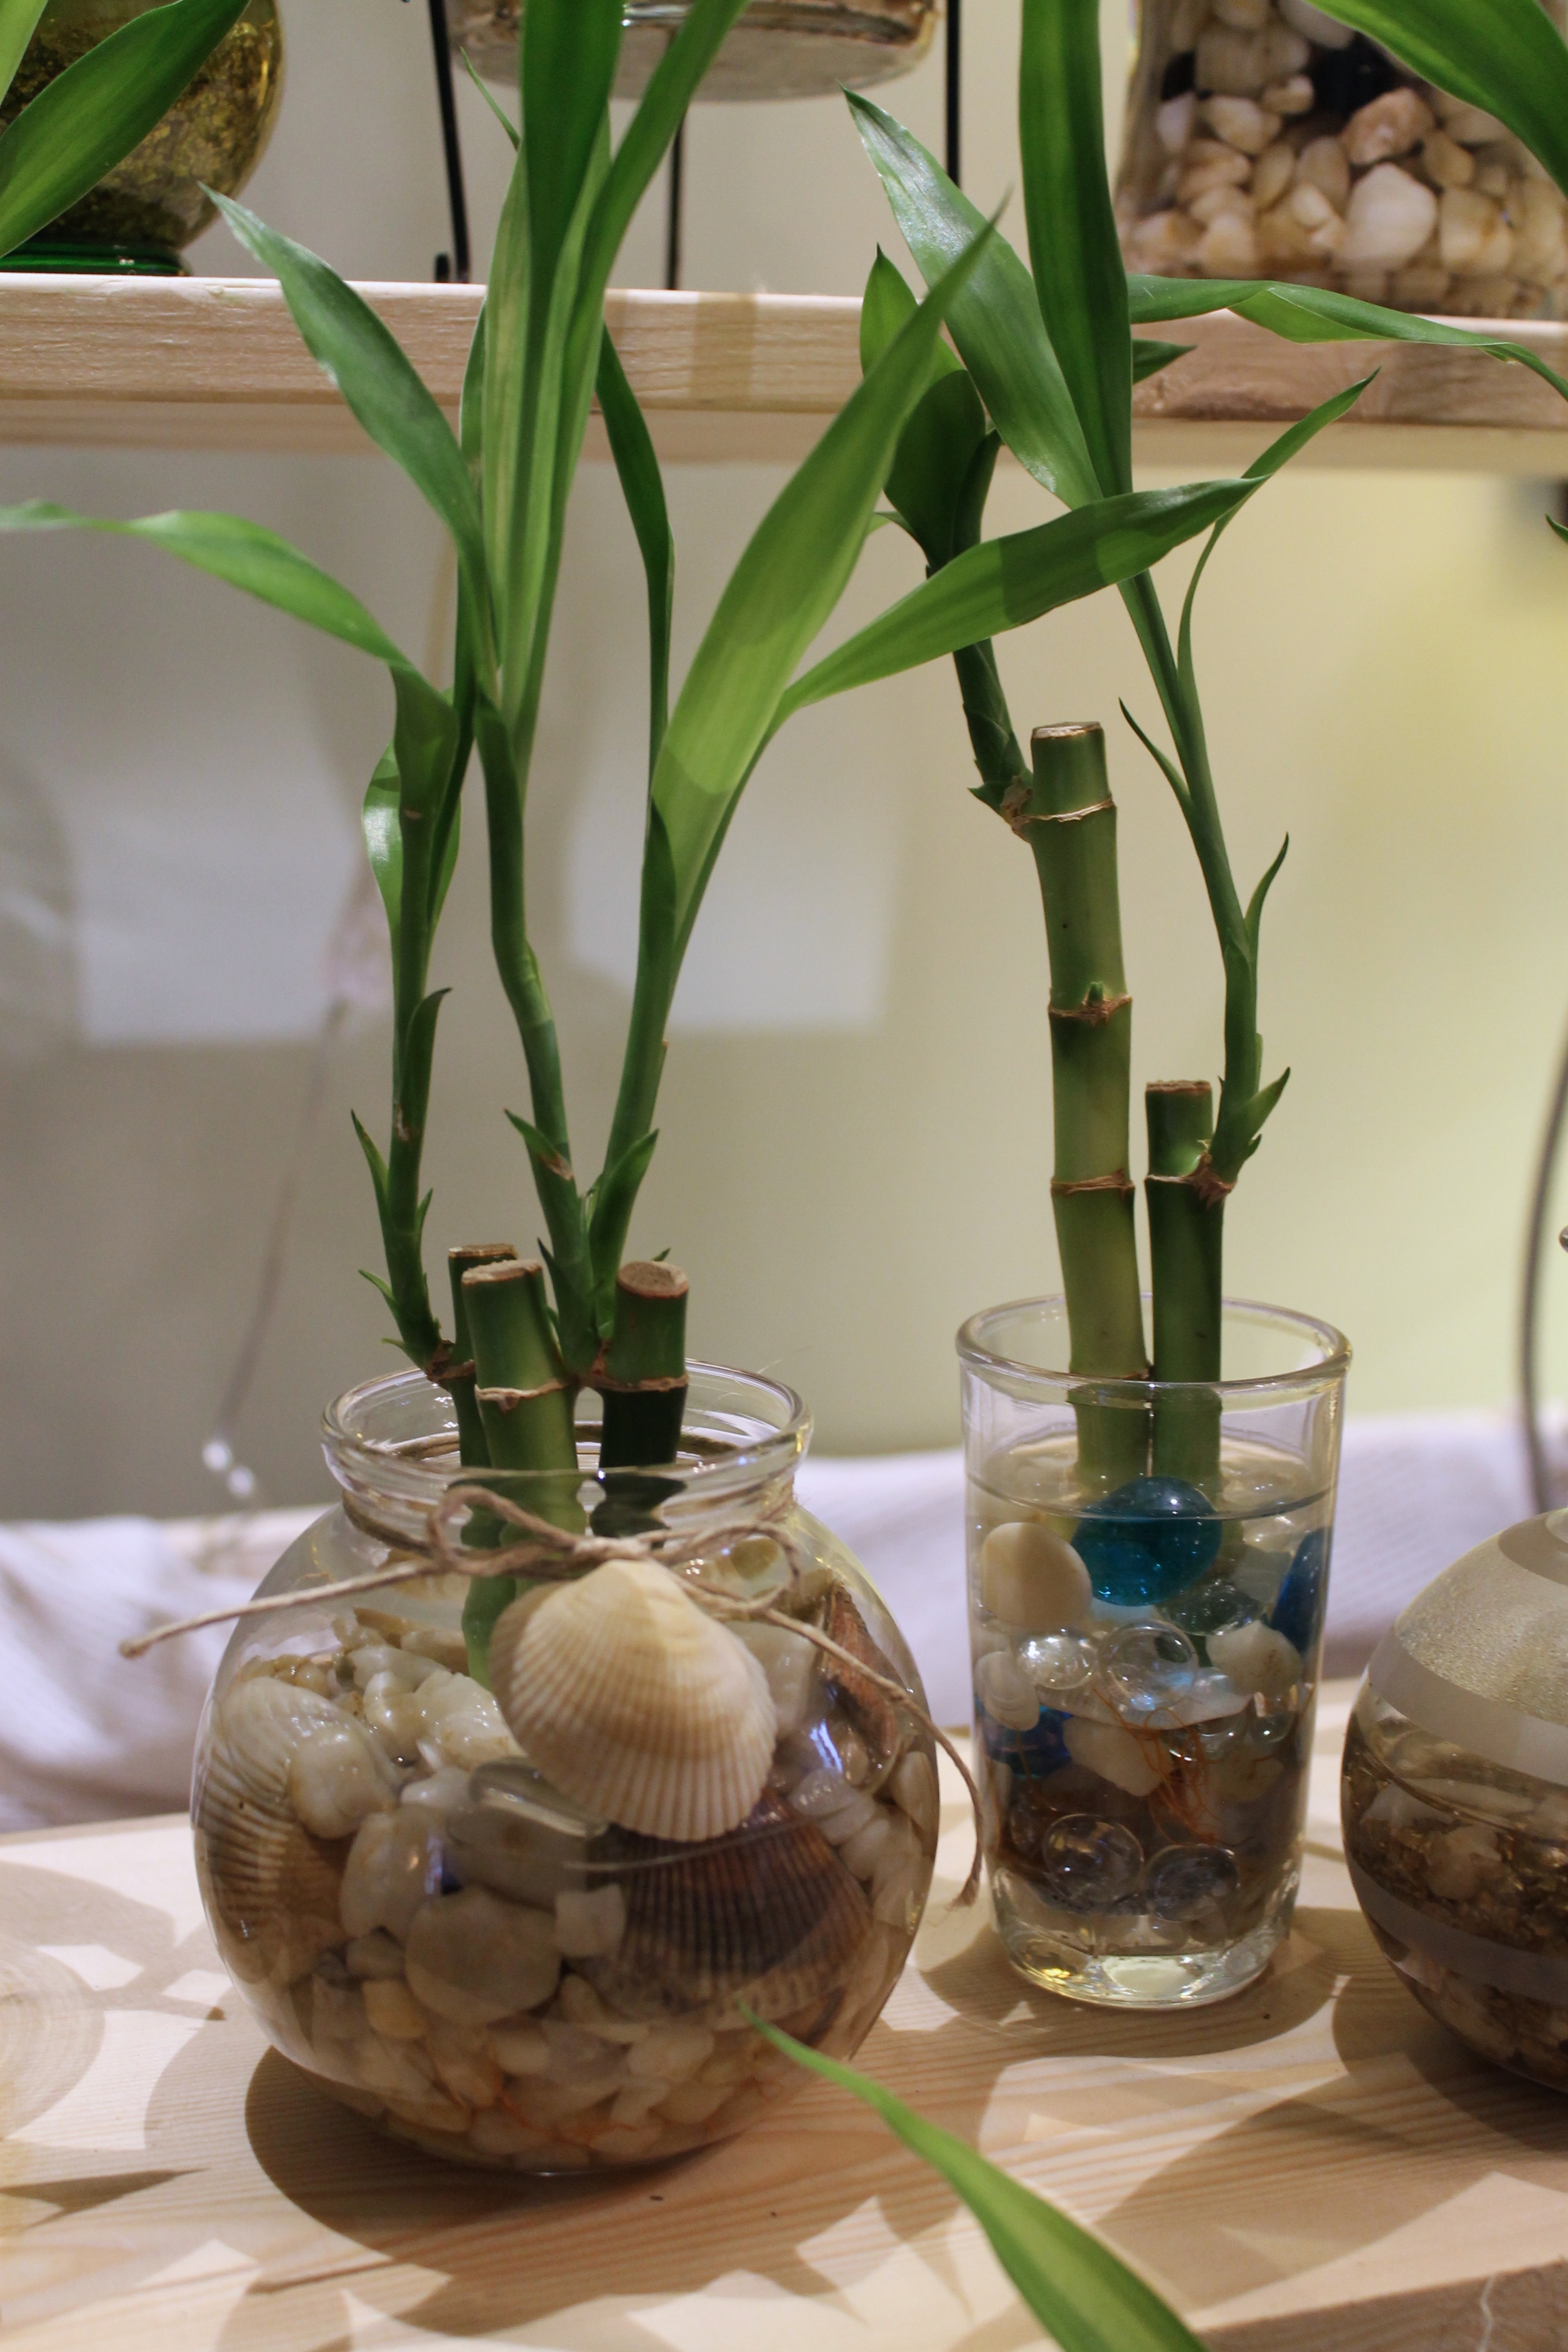  shells collected during our travels&nbsp;enhance bamboo arrangements 